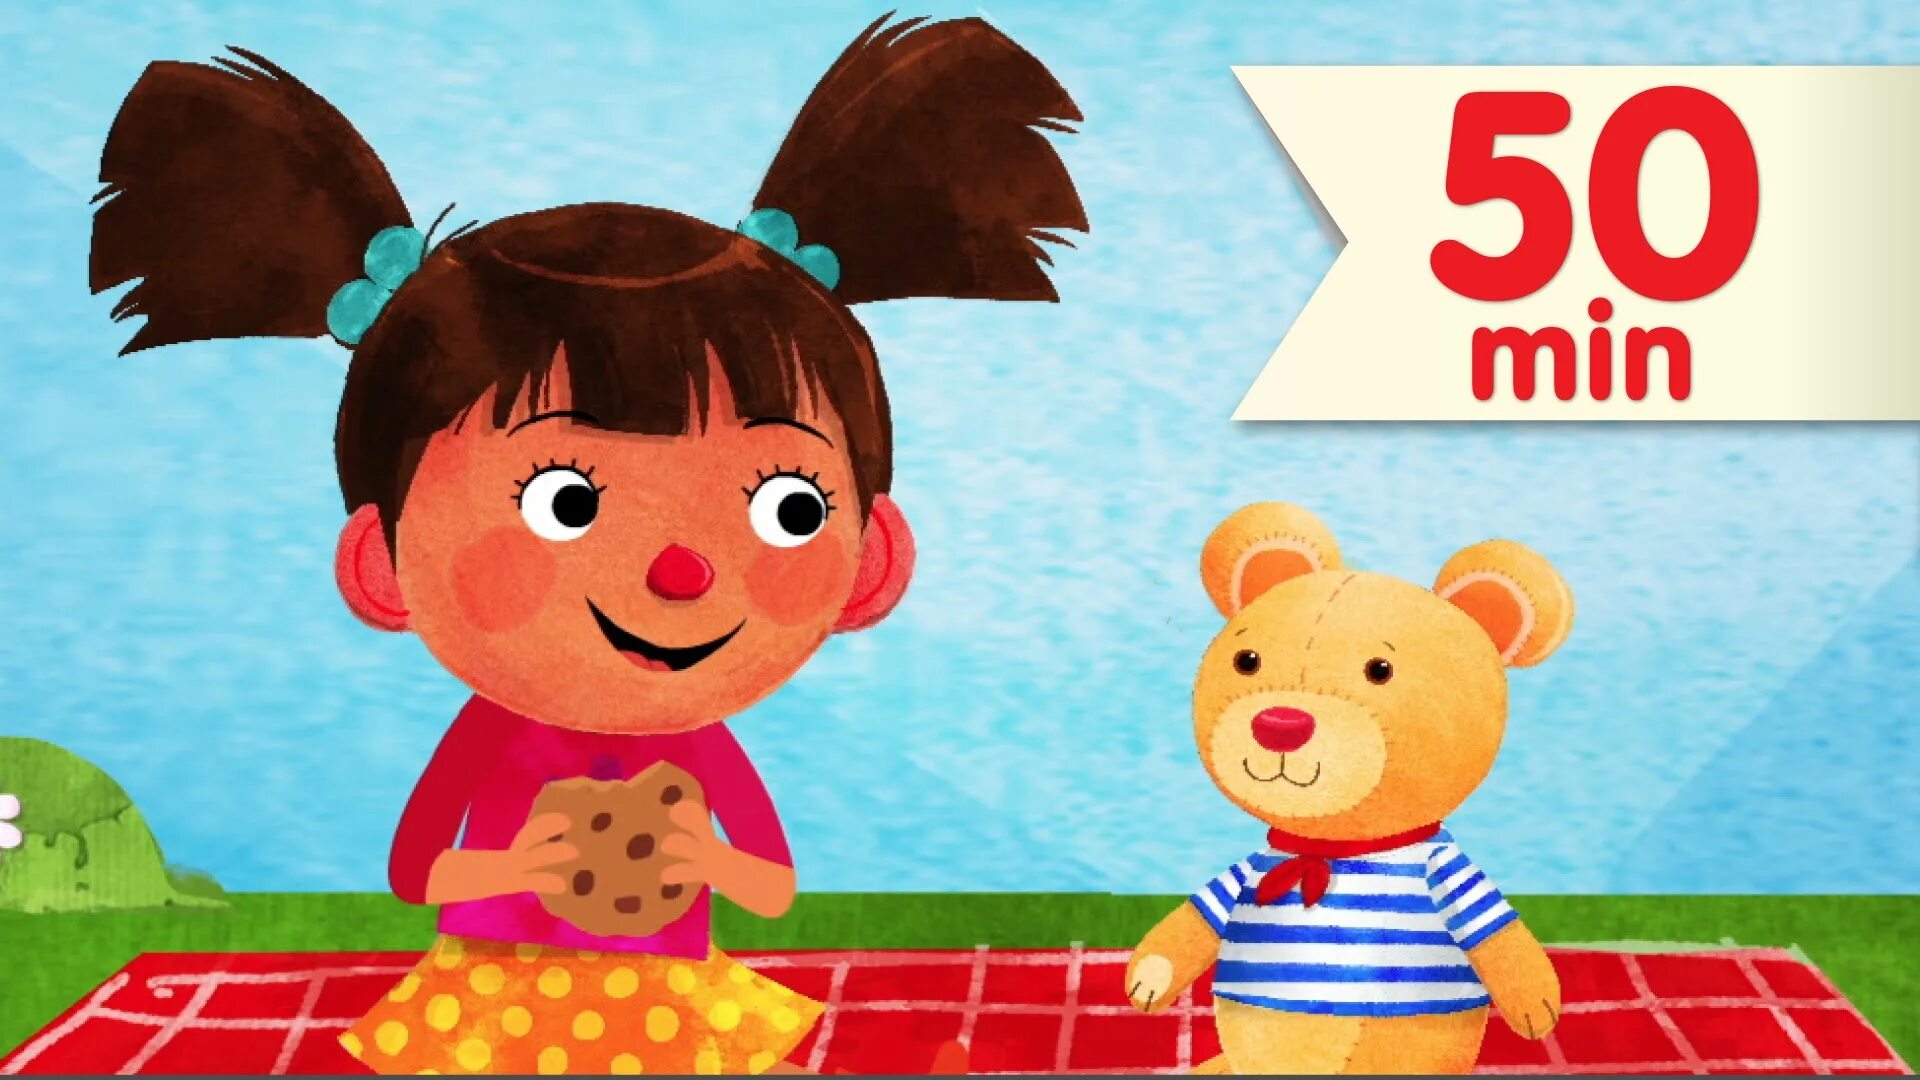 Baby simple songs. Super simple Songs. Super simple Songs Kids Songs. Teddy Bear Song for Kids. Super simple Songs portugues.